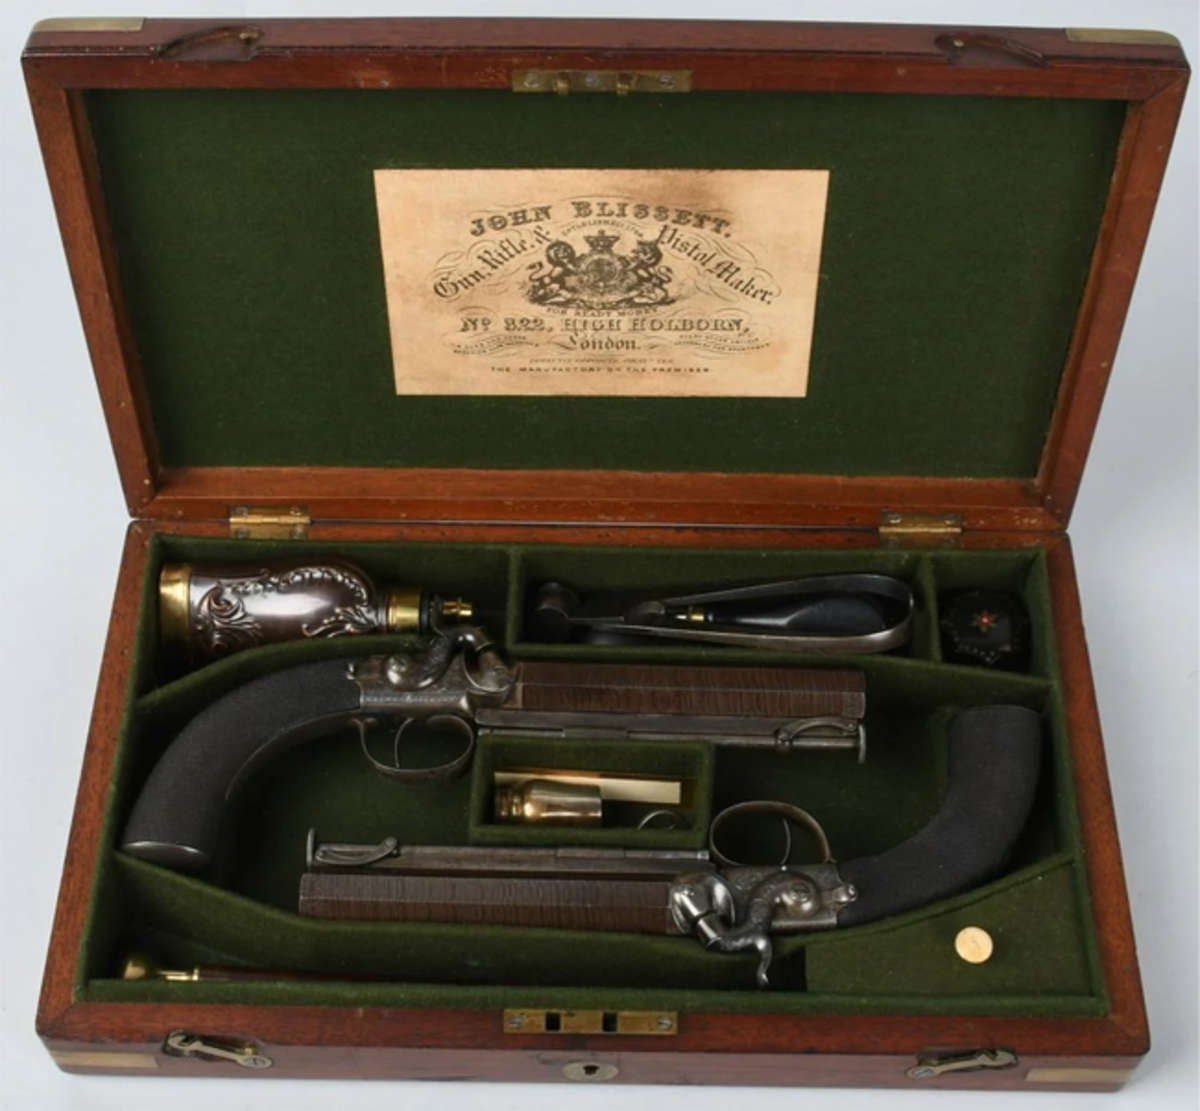  1850s English cased John Blissett percussion pistols with accessories, approximately .65 caliber, finely engraved, original case with key for lock.